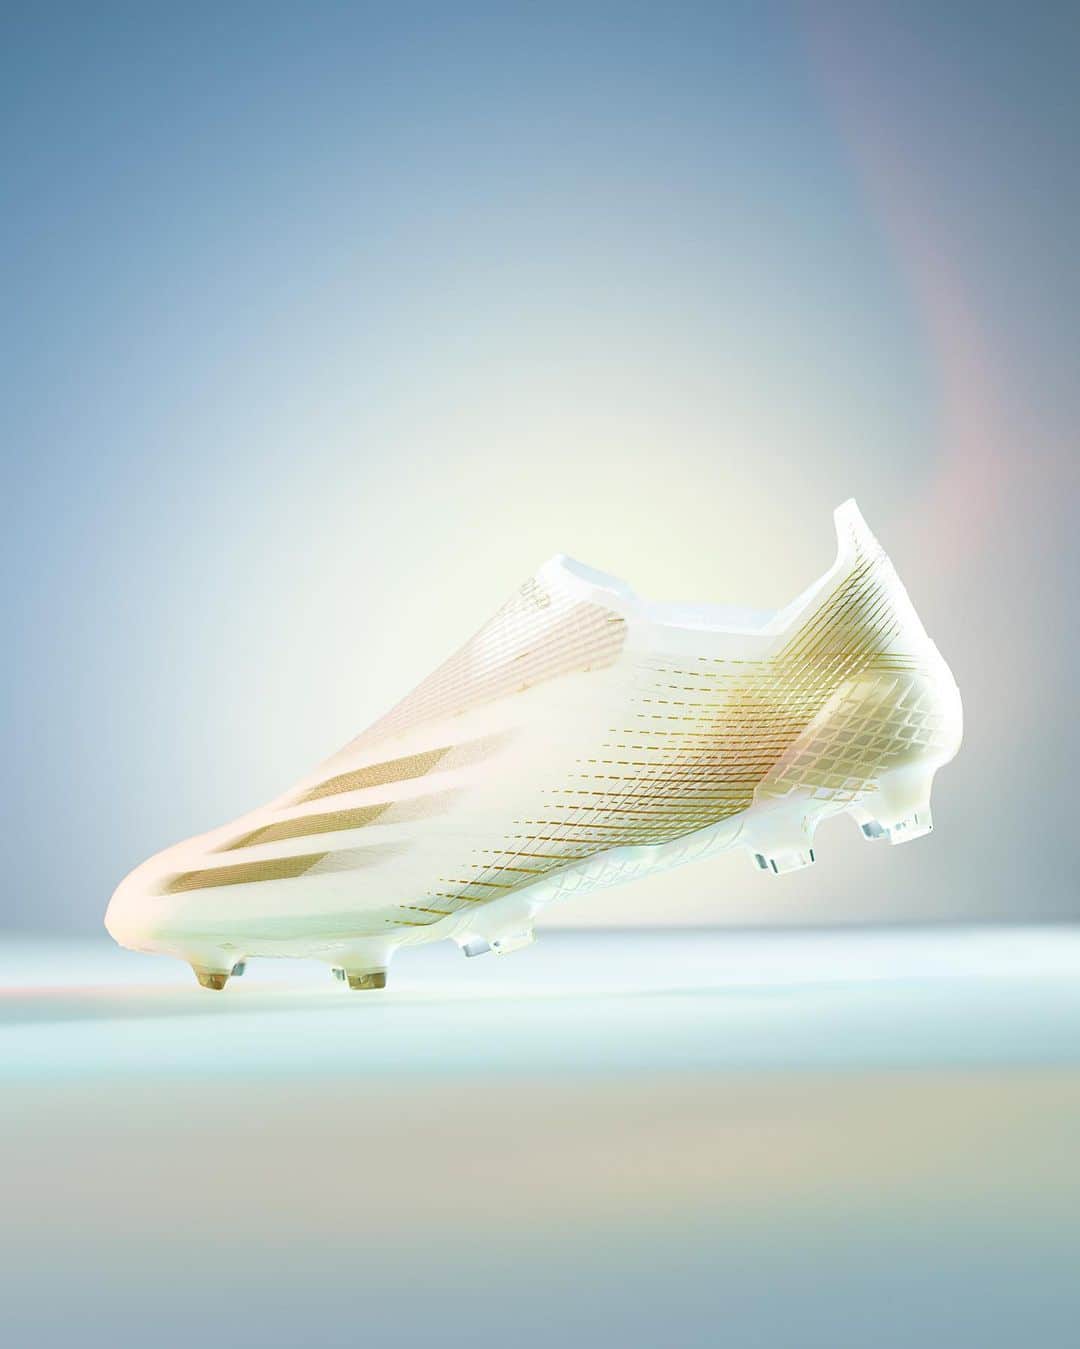 adidas Footballさんのインスタグラム写真 - (adidas FootballInstagram)「Designed for new levels of speed.⁣⁣⁣ ⁣⁣⁣ Swipe to explore #XGhosted 👉⁣⁣⁣ ⁣⁣⁣⁣⁣⁣ 🔎 Introducing an all-new performance material technology, 𝘵𝘳𝘢𝘯𝘴𝘭𝘶𝘤𝘦𝘯𝘵 𝘮𝘪𝘳𝘢𝘨𝘦𝘴𝘬𝘪𝘯. This single layer of high-performance material is layered over a wire framework to create a seamless upper that provides lightweight stability and support.⁣⁣⁣⁣⁣⁣ ⁣⁣⁣⁣⁣⁣ 🔎 The first football boot available at scale with the integration of a dynamic carbon plate. The 𝘤𝘢𝘳𝘣𝘪𝘵𝘦𝘹 𝘴𝘱𝘦𝘦𝘥𝘧𝘳𝘢𝘮𝘦 is a dynamic carbon plate crafted to harnesses the extreme power and performance of carbon fibre but in a flexible form. ⁣⁣⁣⁣⁣⁣ ⁣⁣⁣⁣⁣⁣ 🔎 In a first of its kind, a 𝘷𝘢𝘤𝘶𝘶𝘮 𝘧𝘪𝘵 experience lets players feel the air sucked rapidly out of the boot when worn, creating a super snug fit that supports explosive moves thanks to its proximity to the contours of the foot. ⁣⁣⁣⁣⁣⁣ ⁣⁣⁣⁣⁣⁣ Tap to Shop.💨  #Football #Soccer #adidasFootball」9月1日 16時59分 - adidasfootball